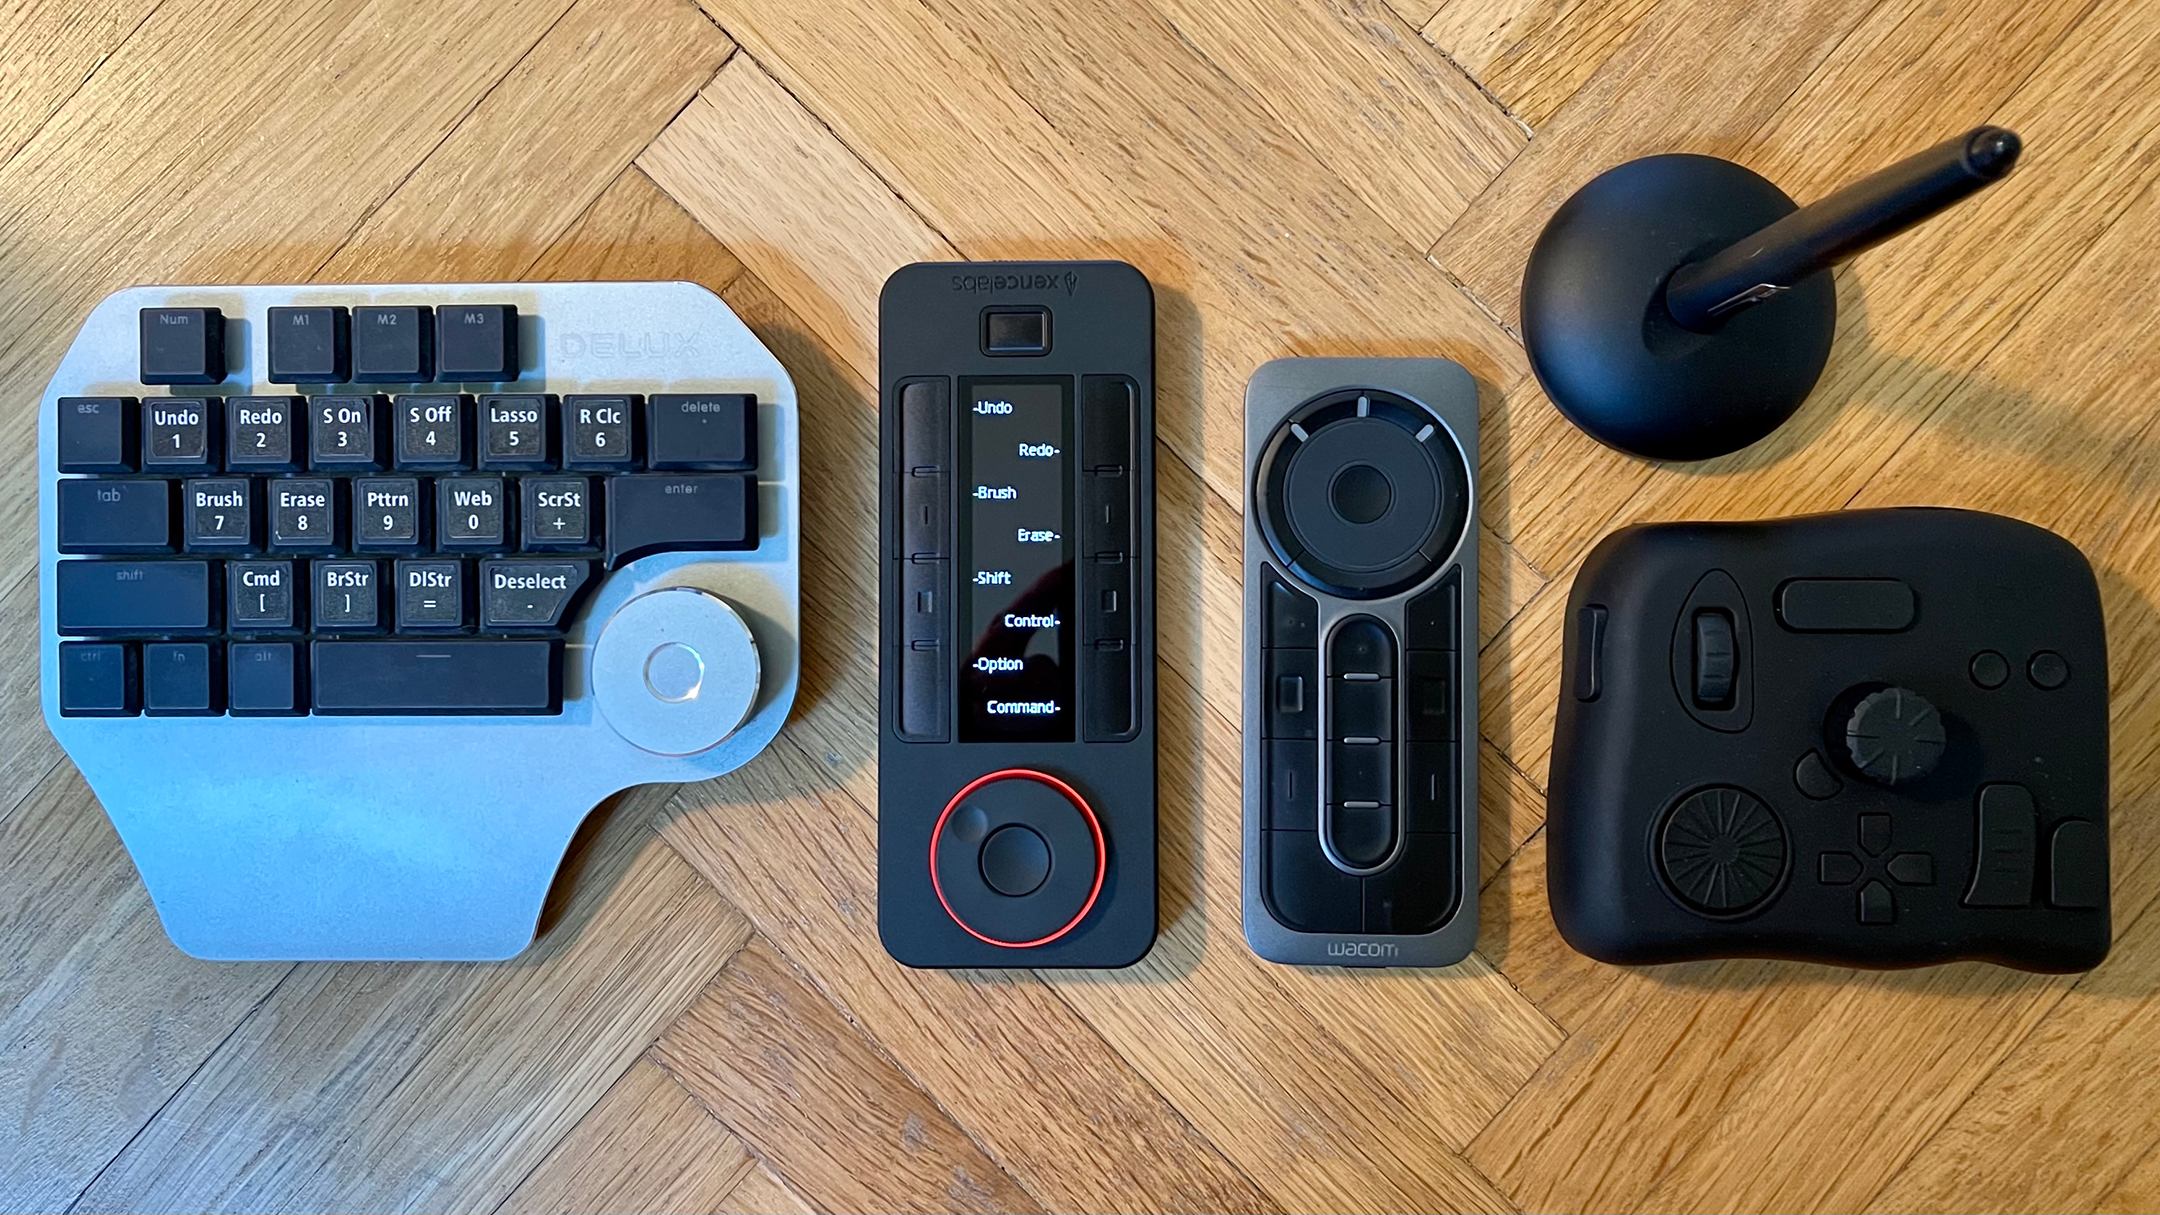 Xencelabs' Quick Keys Remote Promises a More Streamlined Workflow